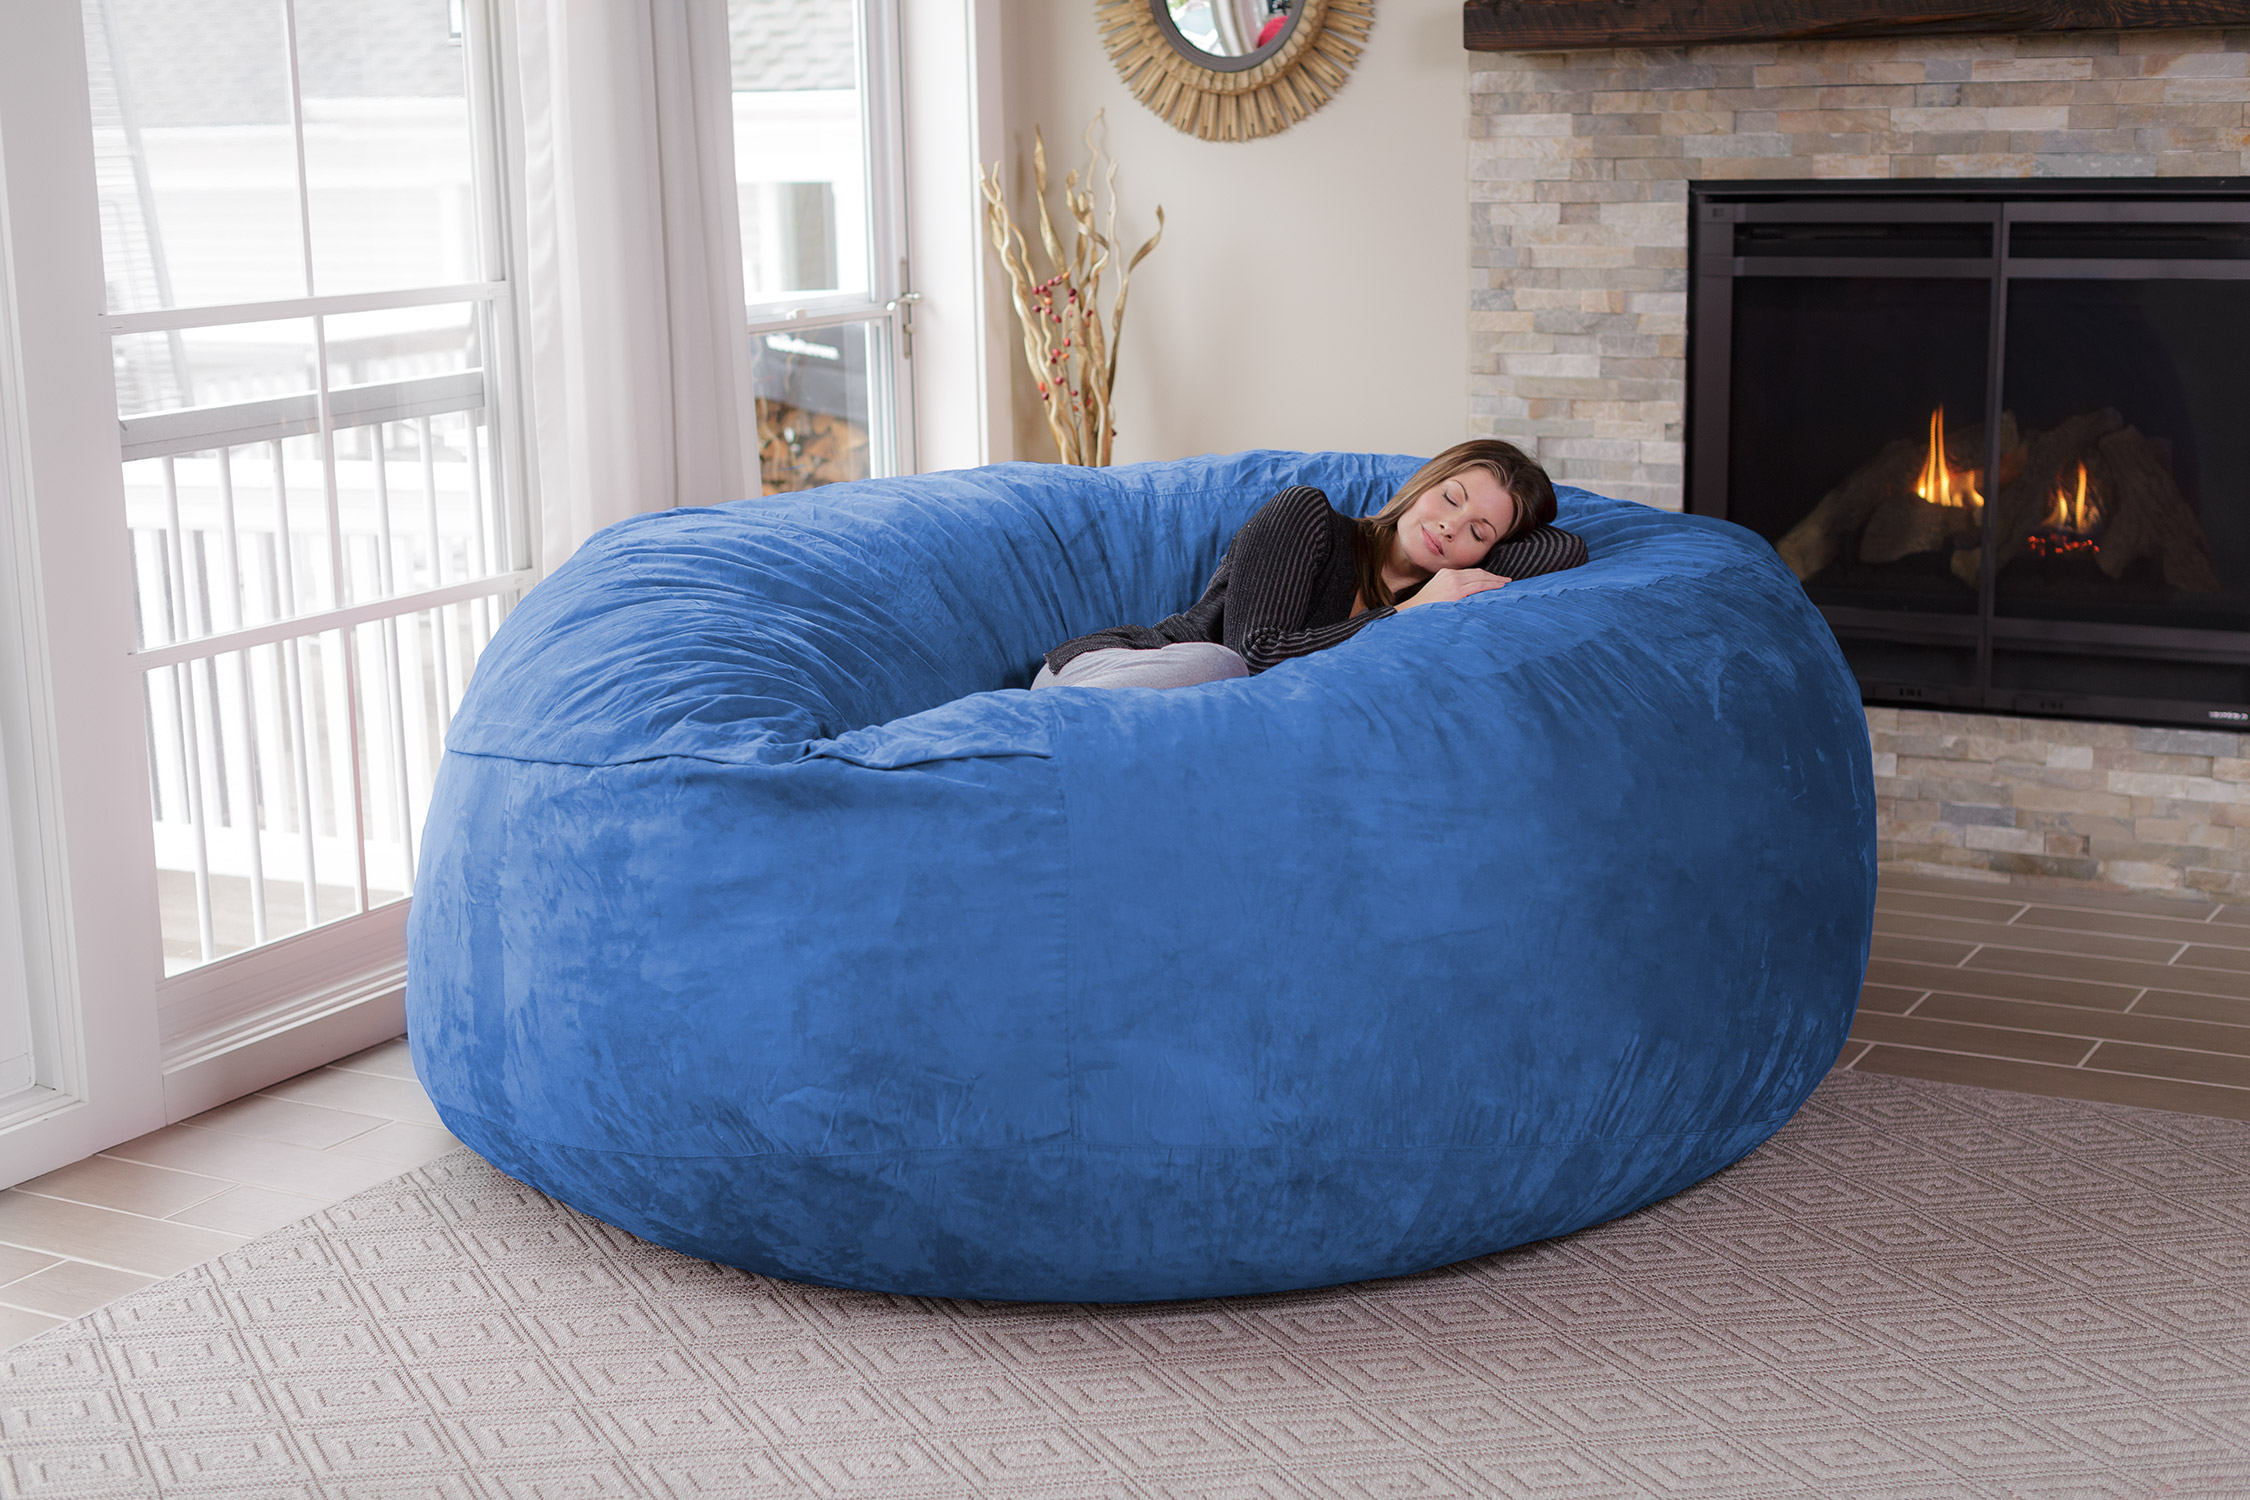 Chill Sack Bean Bag Chair, Memory Foam Lounger,Microsuede Cover, Adults,Teens, 8 ft, Royal Blue - image 1 of 1